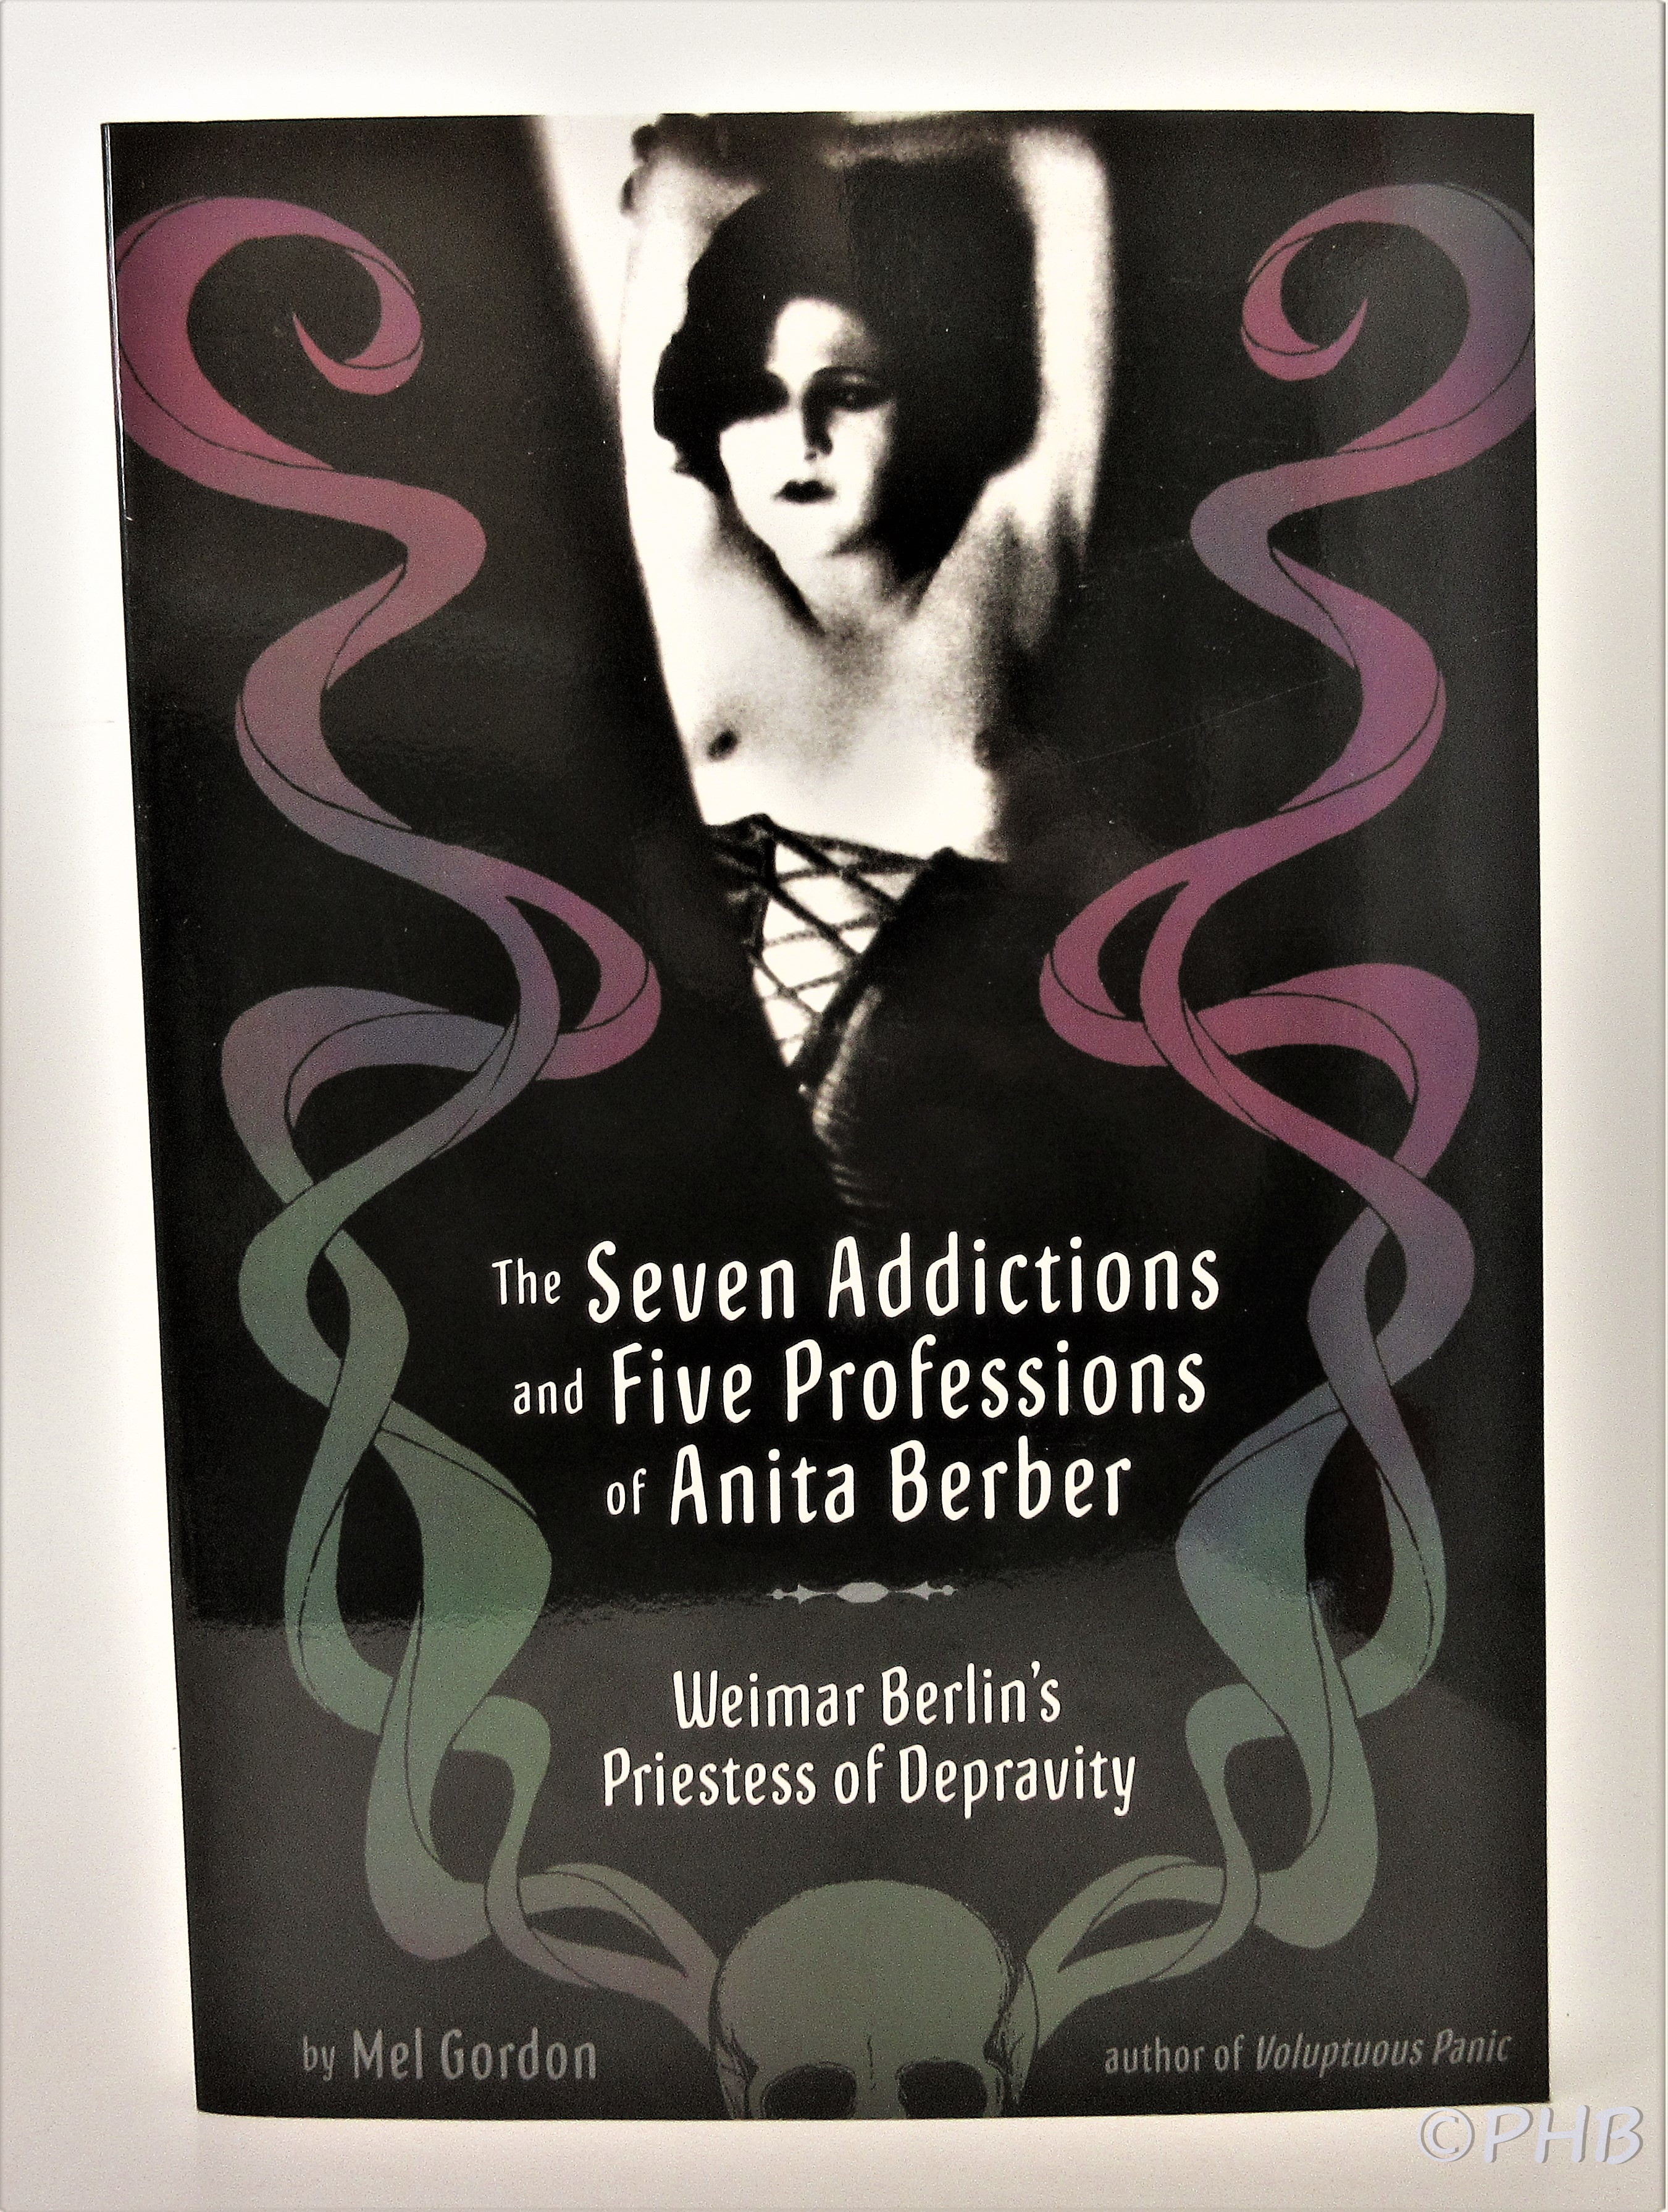 The Seven Addictions and Five Professions of